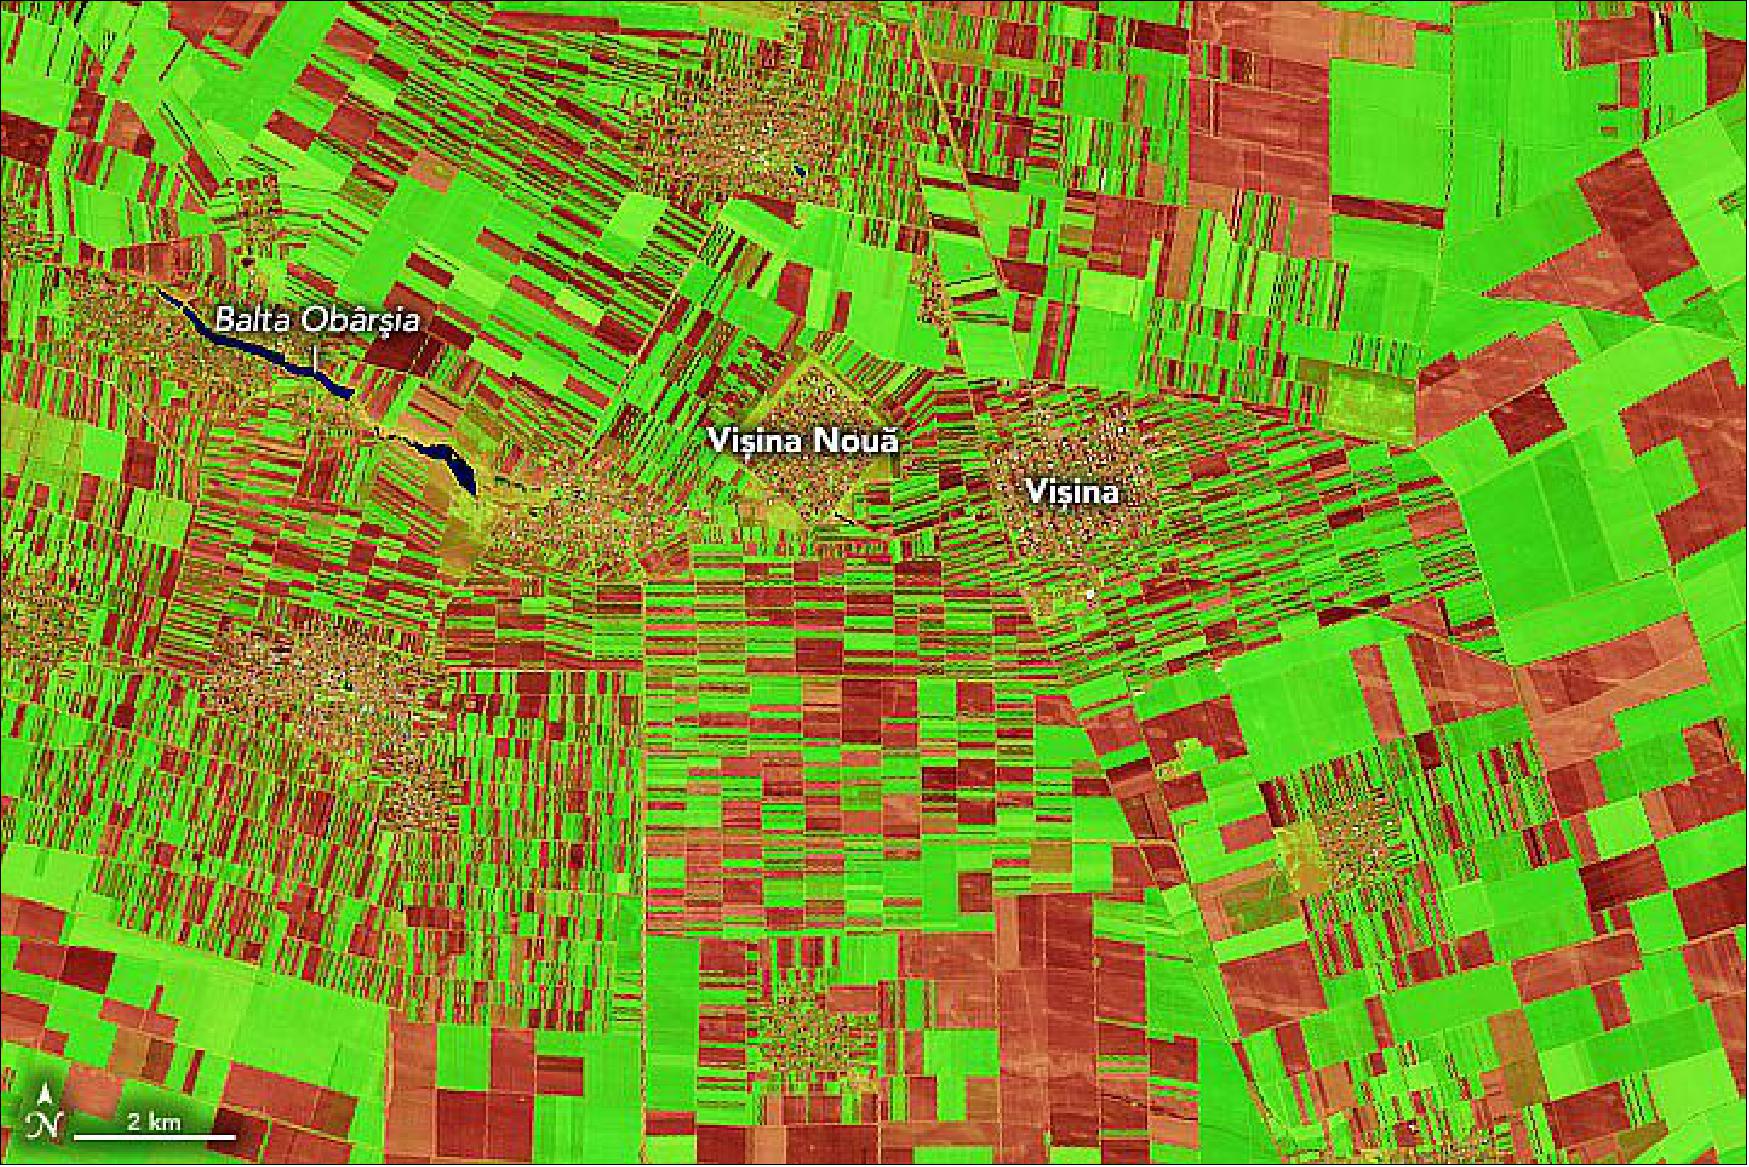 Figure 28: Farther south beyond the foothills, farming on the Oltenia Plain appears even more widespread. This image shows a detailed view of bright green crops mixed with brown and red bare ground. The square-shaped boundaries of villages, such as Visina Nouă and Visina, add to the geometric patchwork. Only the thin lake (Balta Obârsia) breaks up the scene with a natural shape (image credit: NASA Earth Observatory)